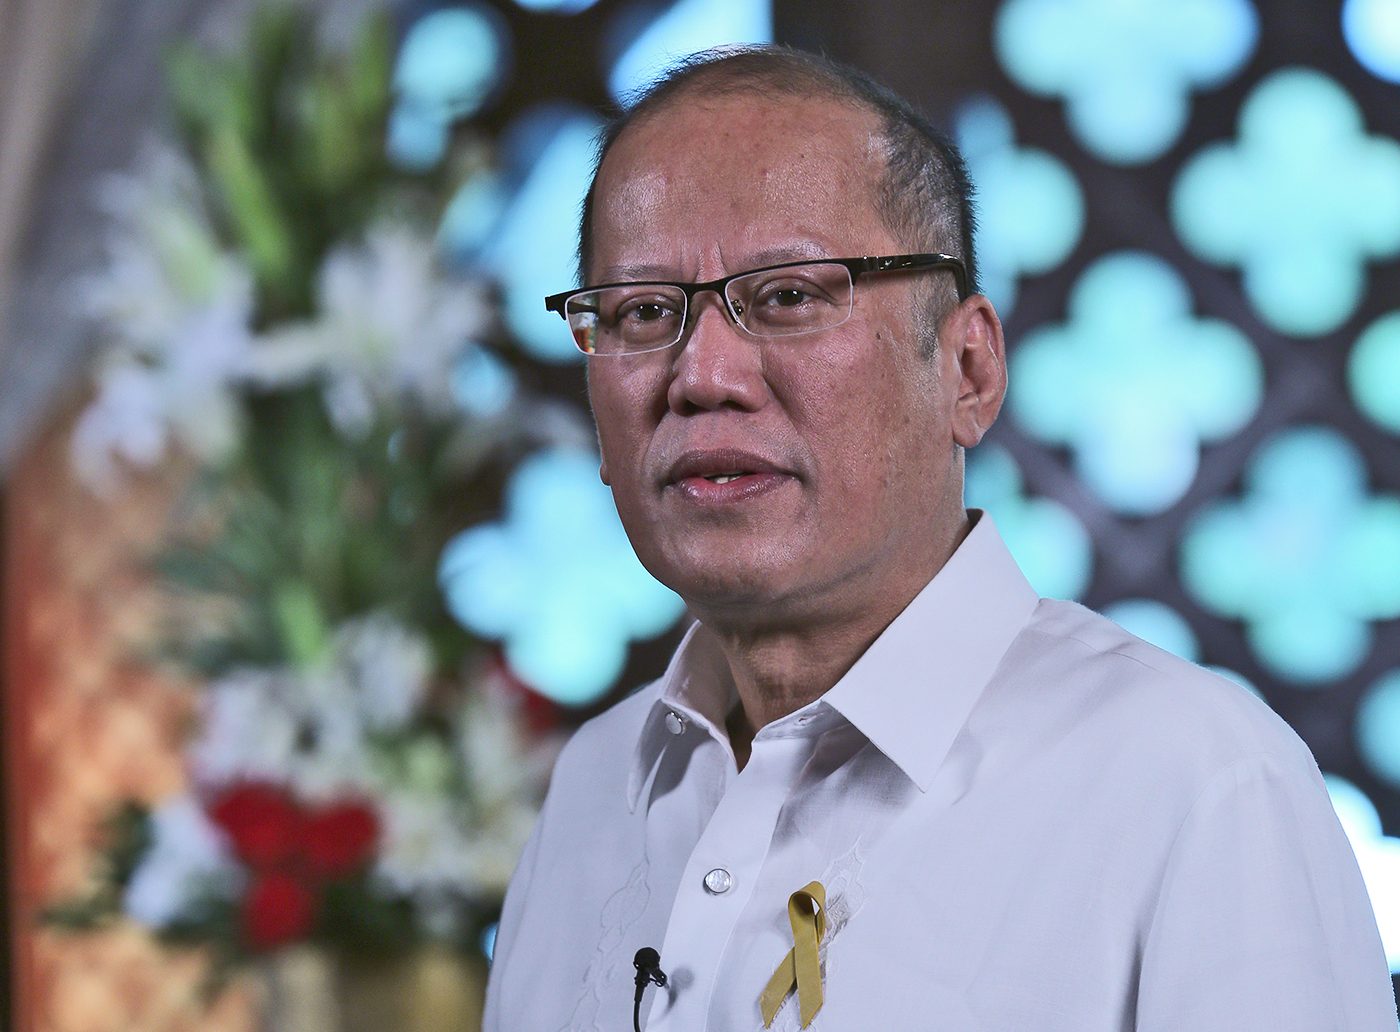 Aquino’s Lenten message: Be on the side of justice